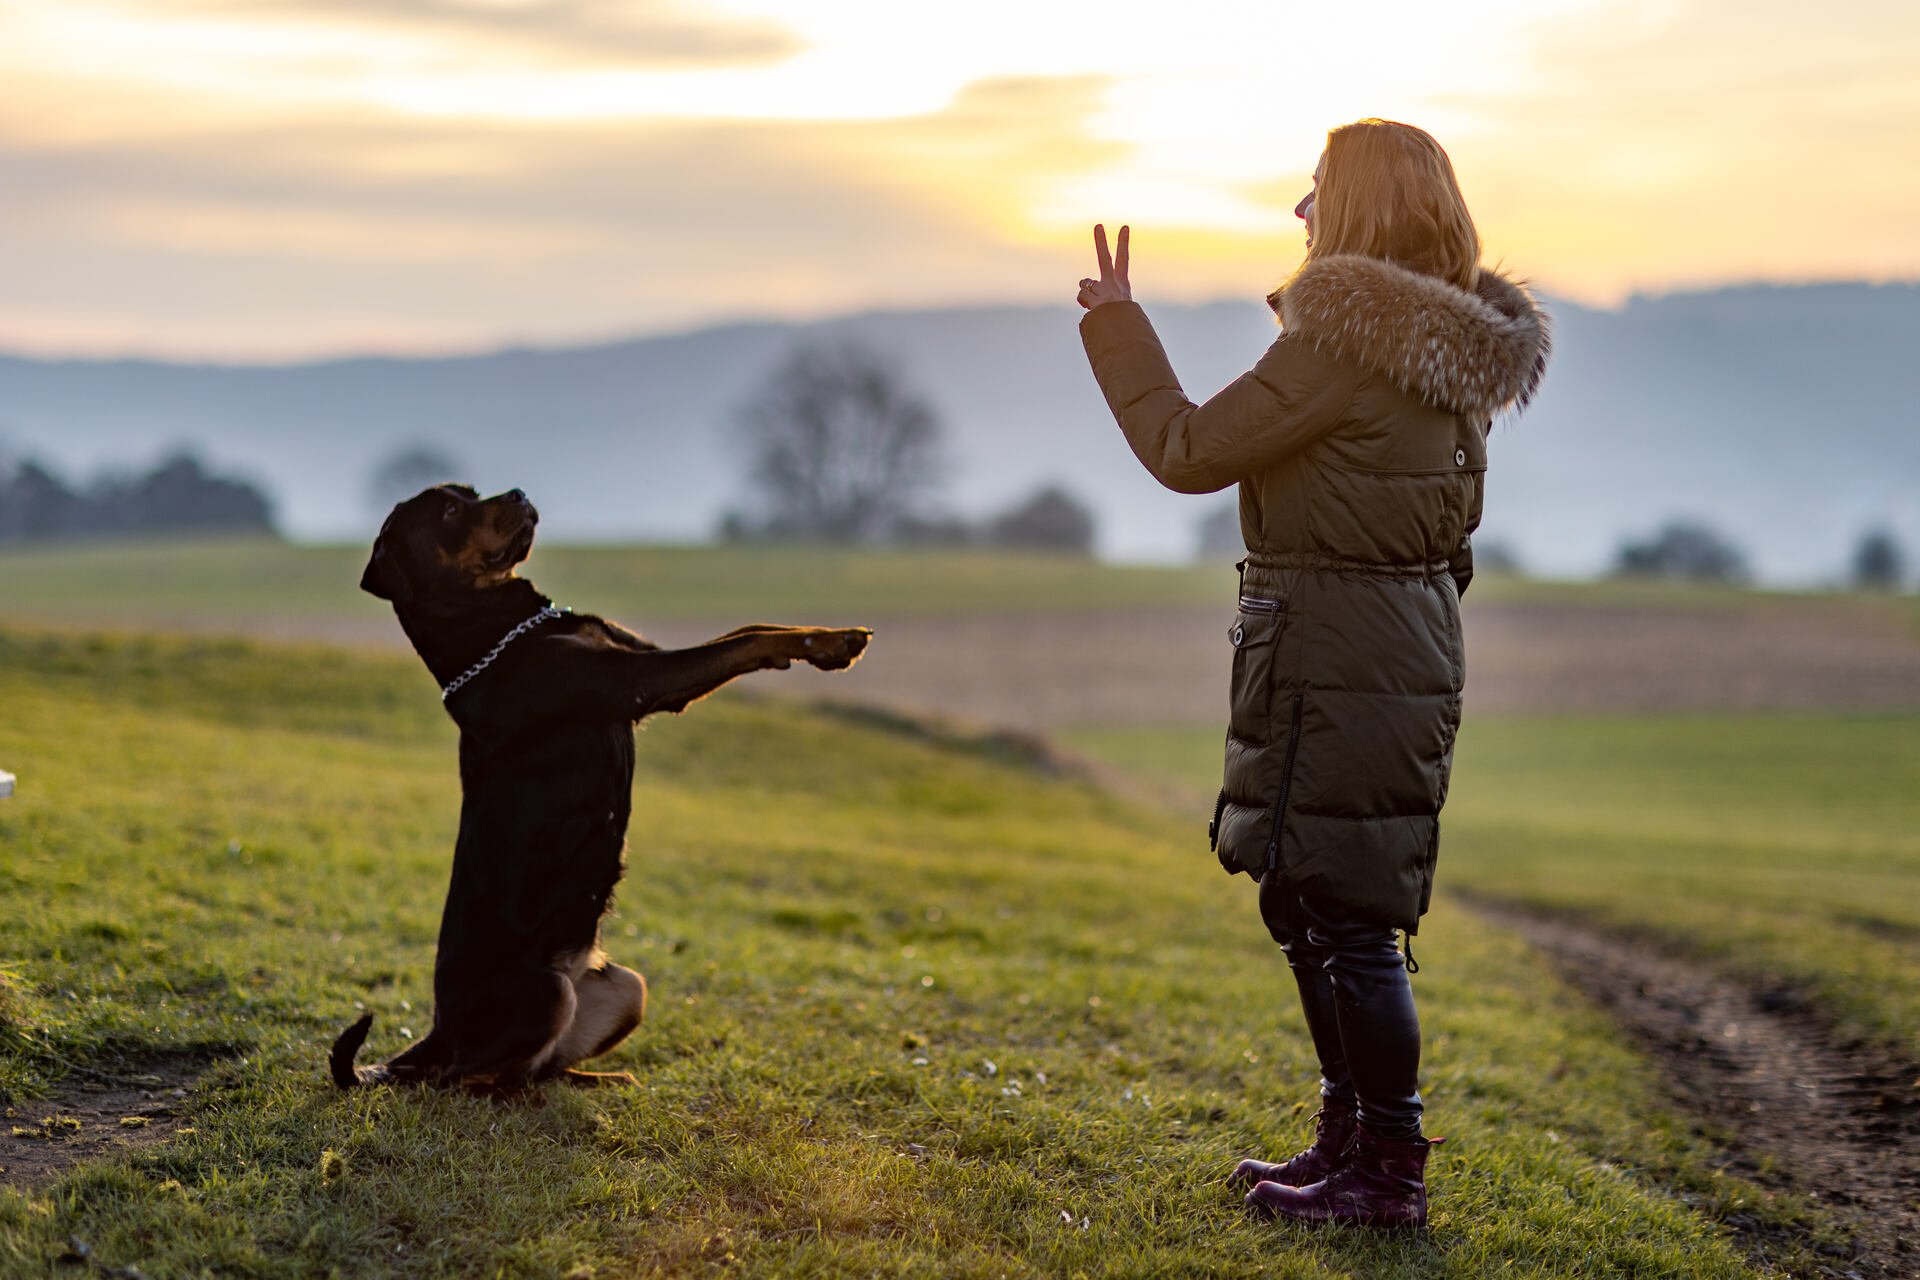 A woman training a dog outdoors